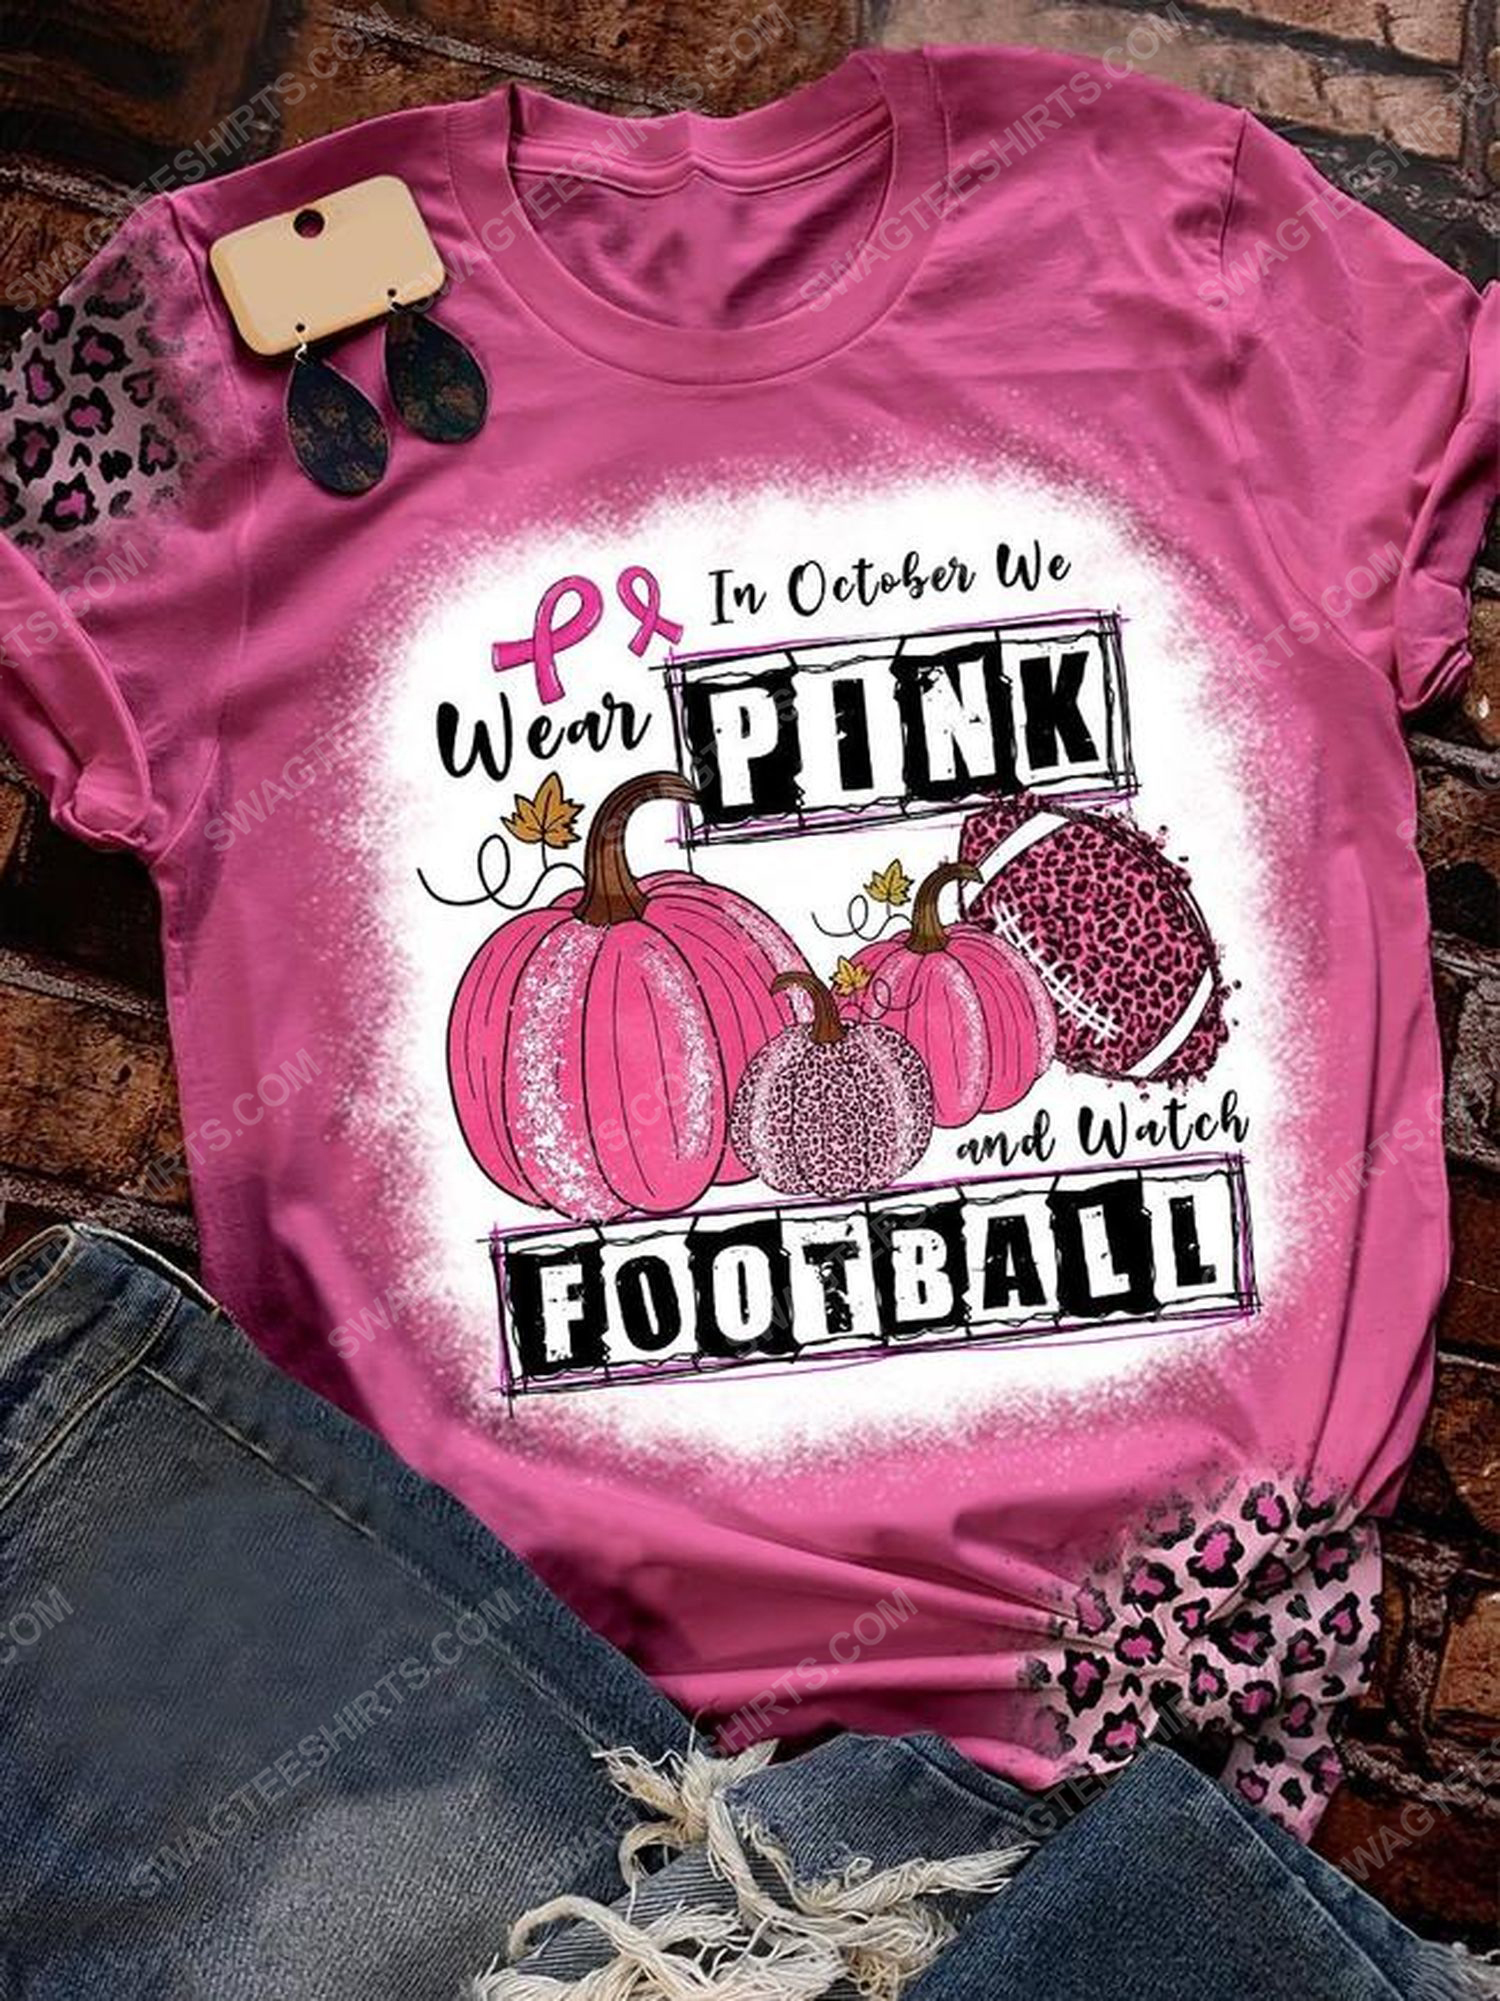 Breast cancer in october we wear pink and watch football shirt 1 - Copy (2)